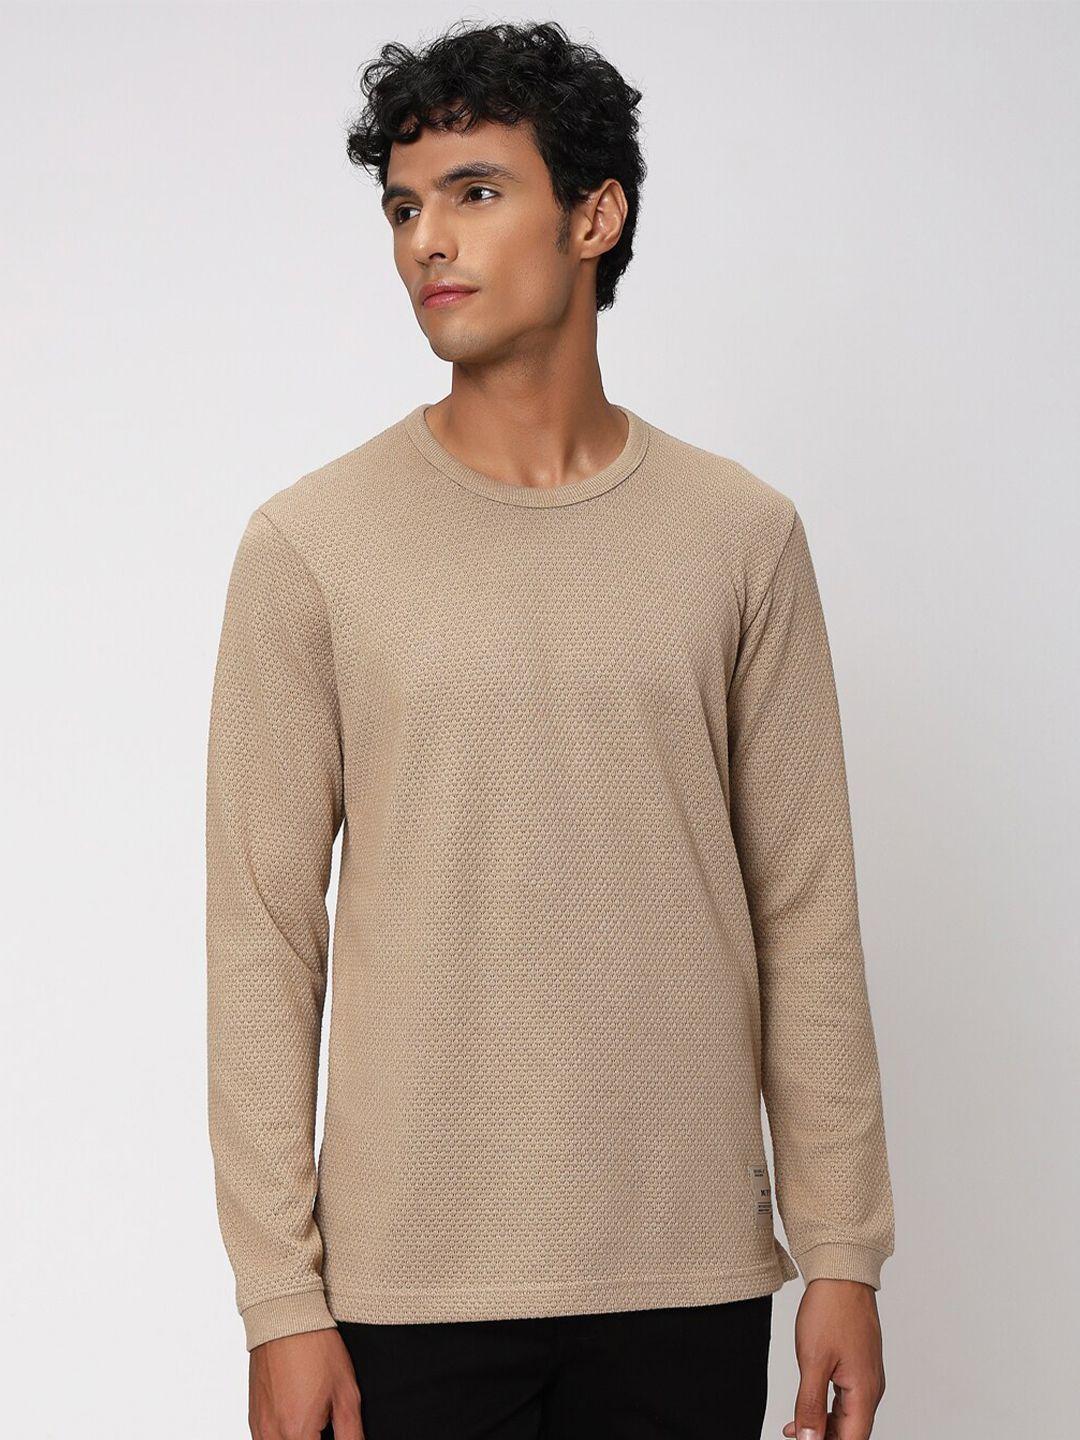 mufti self design round neck long sleeves slim fit t-shirt